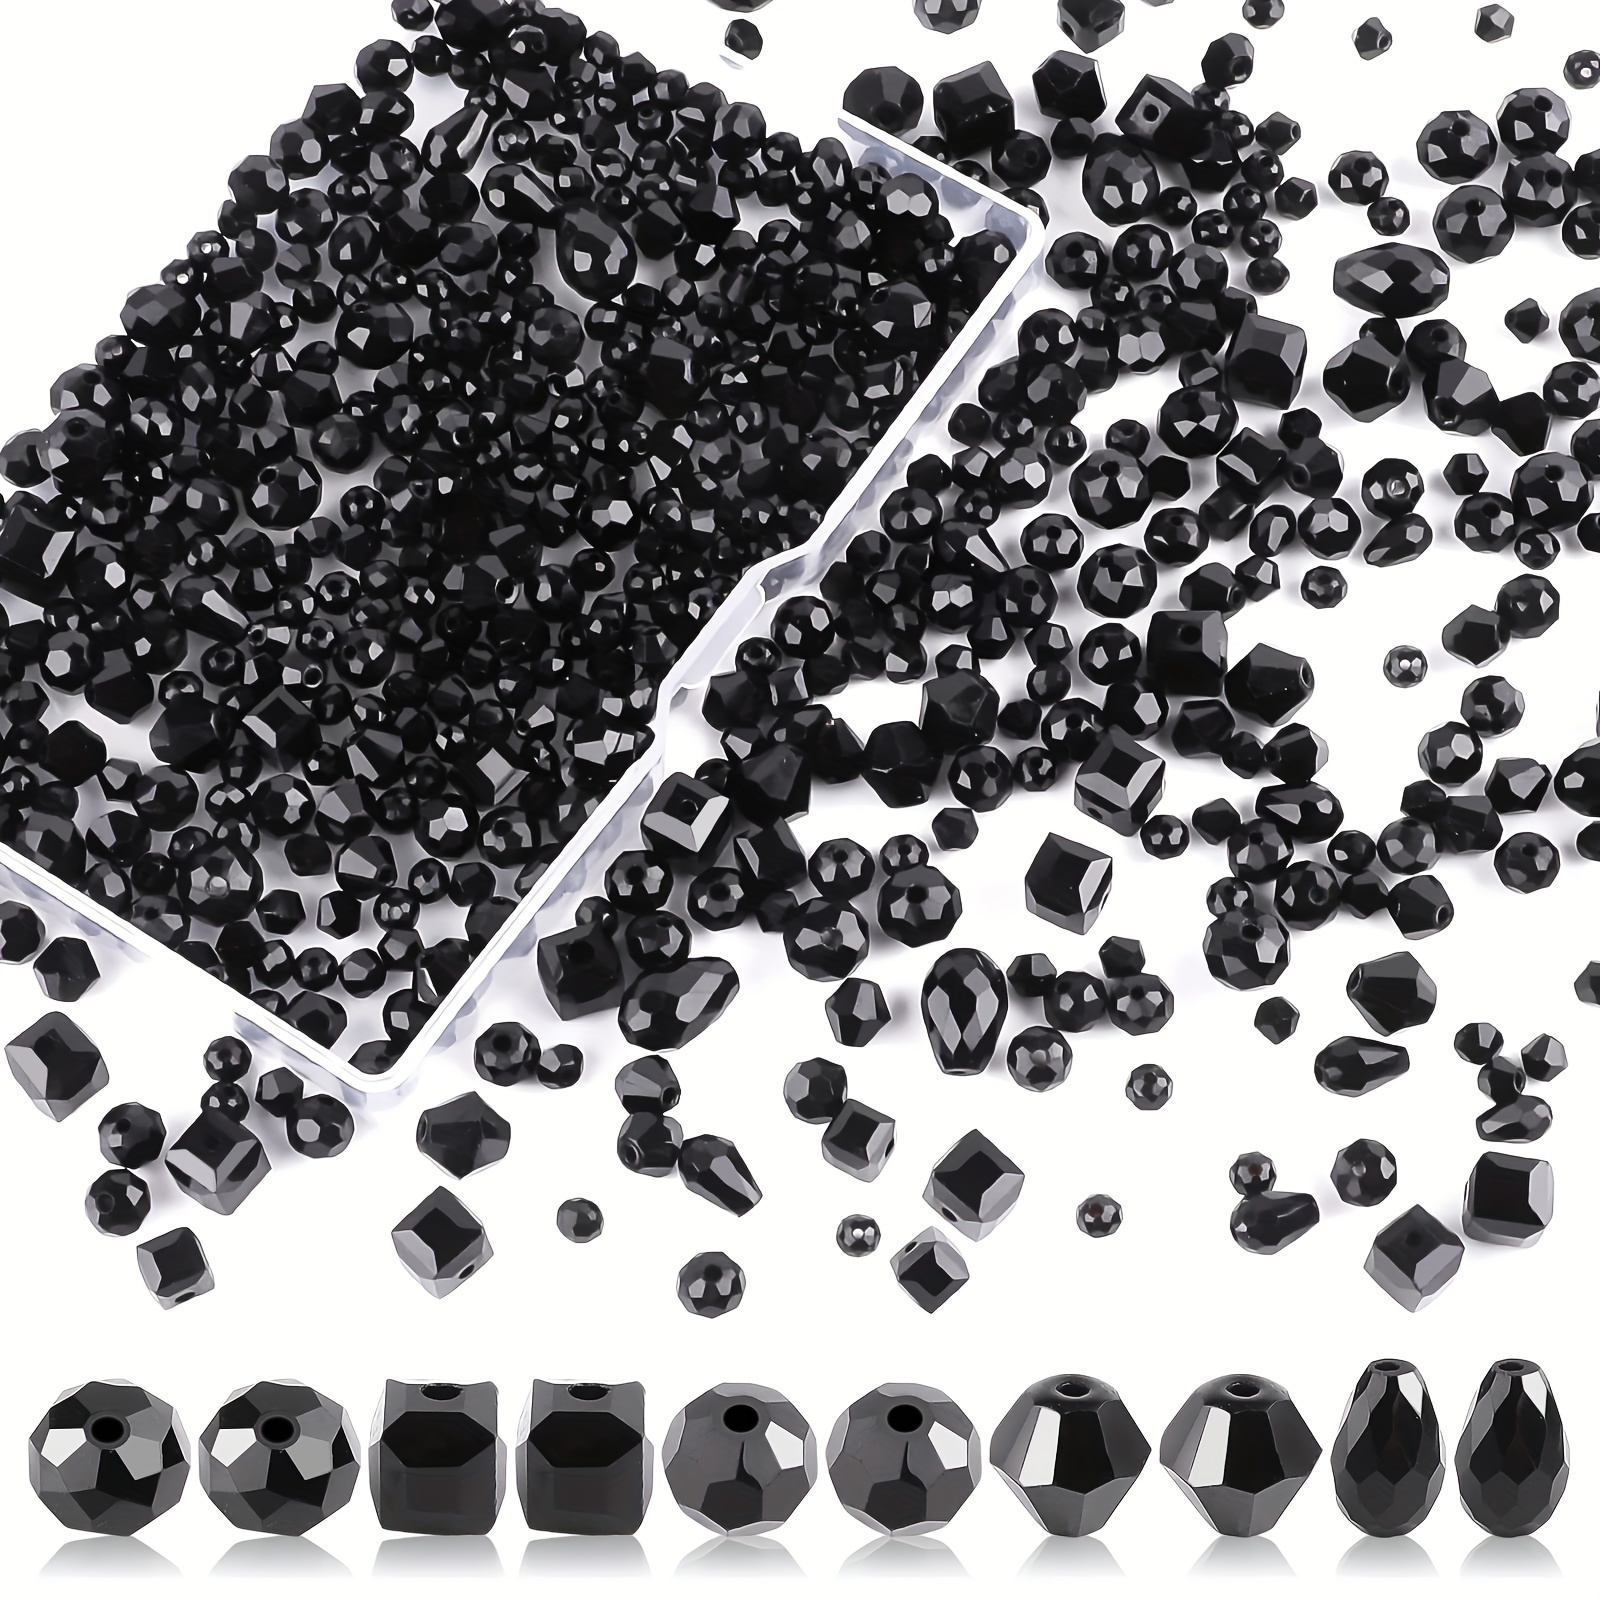 

330-piece Black Glass Bead Set - Assorted Shapes With Faceted Round, Square & Teardrop Crystals For Diy Jewelry Making - Ideal For Necklaces, Bracelets & Earrings Craft Kit